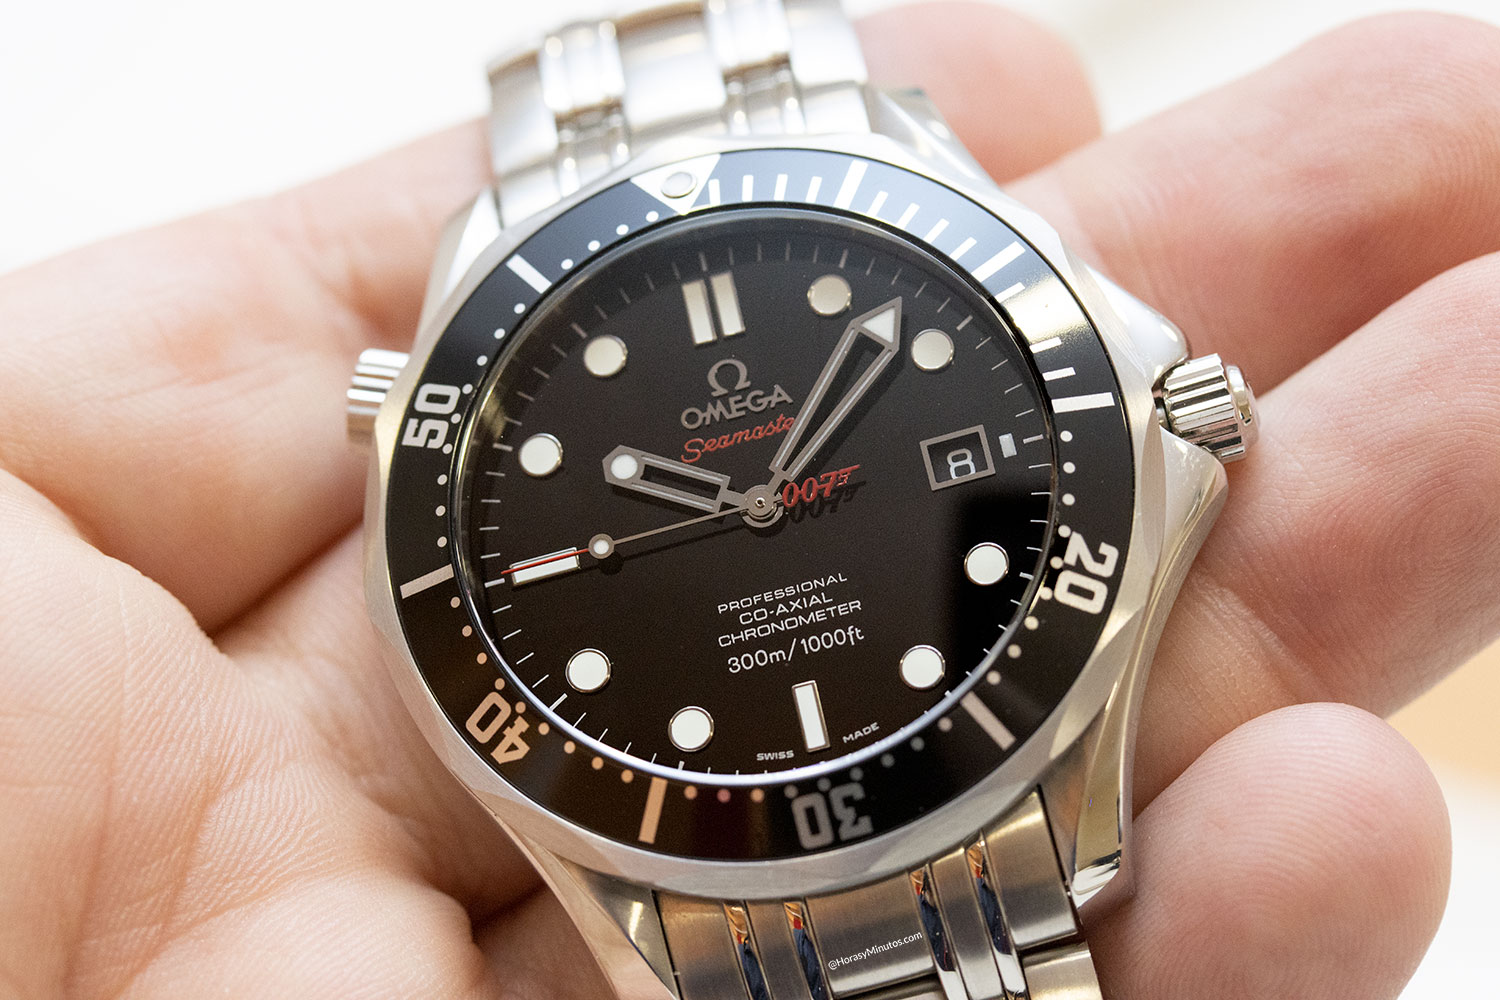 Omega Seamaster 300M Quantum of Solace Limited Edition